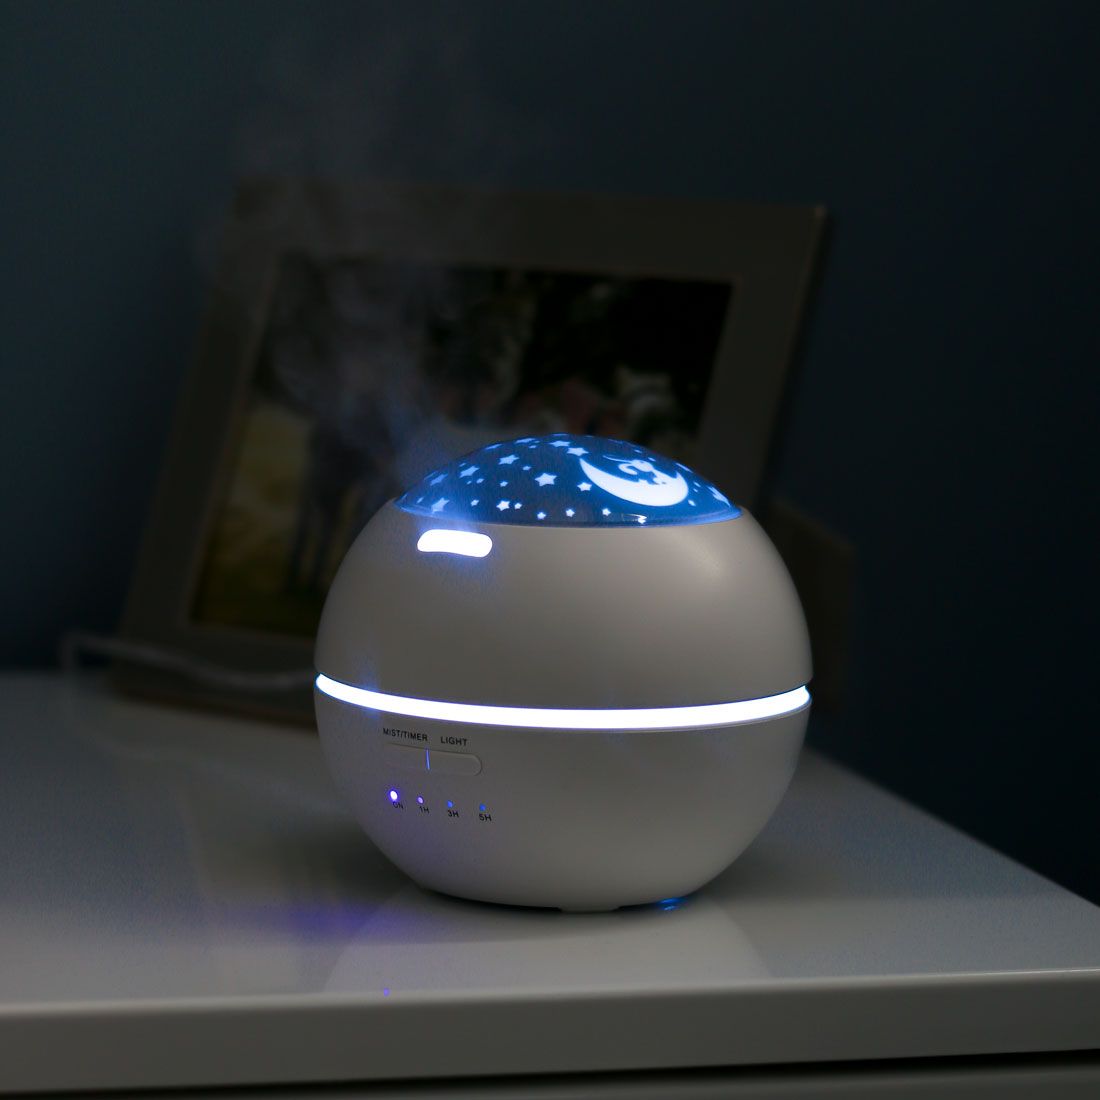 Lifemax Star Projection Humidifier, Our stylish Aromatherapy Humidifier will help you to relax and unwind with a colour changing scene projected onto your ceiling. The generous mist will bring relief from the dry air associated with colds, dry skin and Asthma and allergies, while the addition of essential oils offers a treat for your senses. Ideal for use in the bedroom, the humidifier has options of continuous operation or 1/3/5 hour timers. For those easily disturbed at night, the unit features a quiet-ru